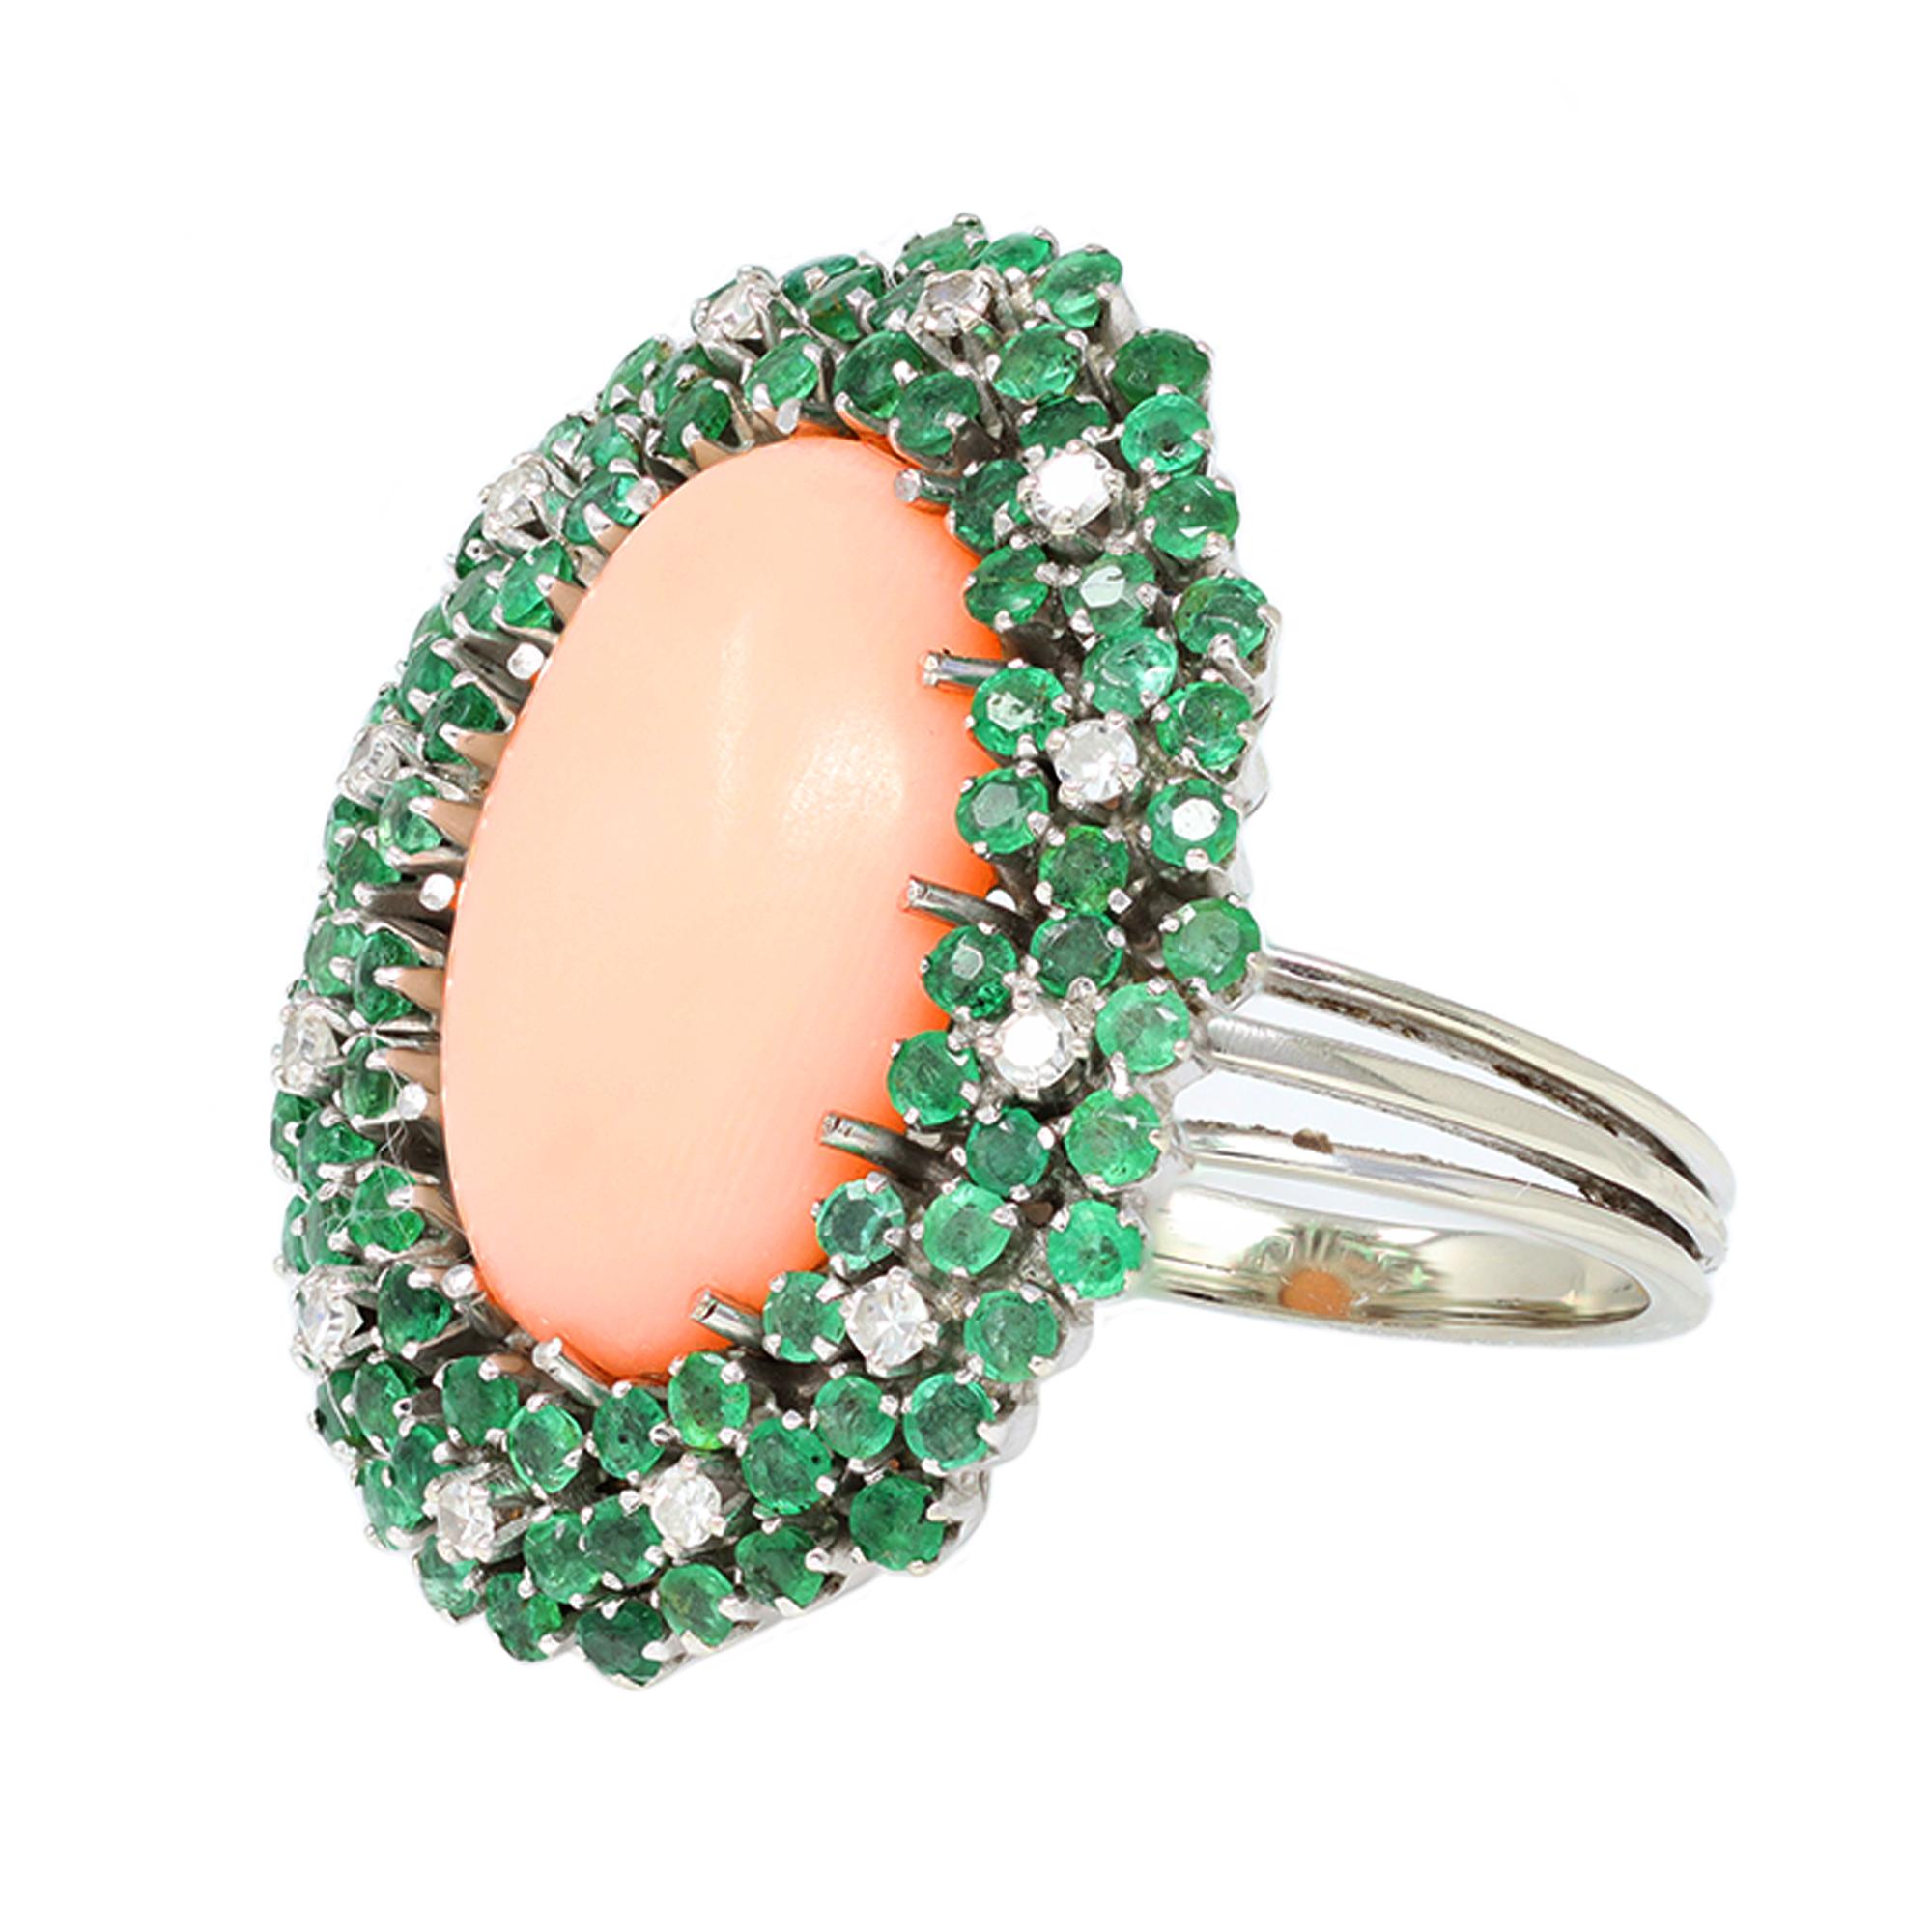 An Italian Angel Skin Coral cabochon ring with emeralds and diamonds set in 18K white gold, circa 1950. Handmade in Italy, this cocktail ring features a blush pink oval shape coral measuring 12x17 millimeter, surrounded by emeralds and diamonds. The